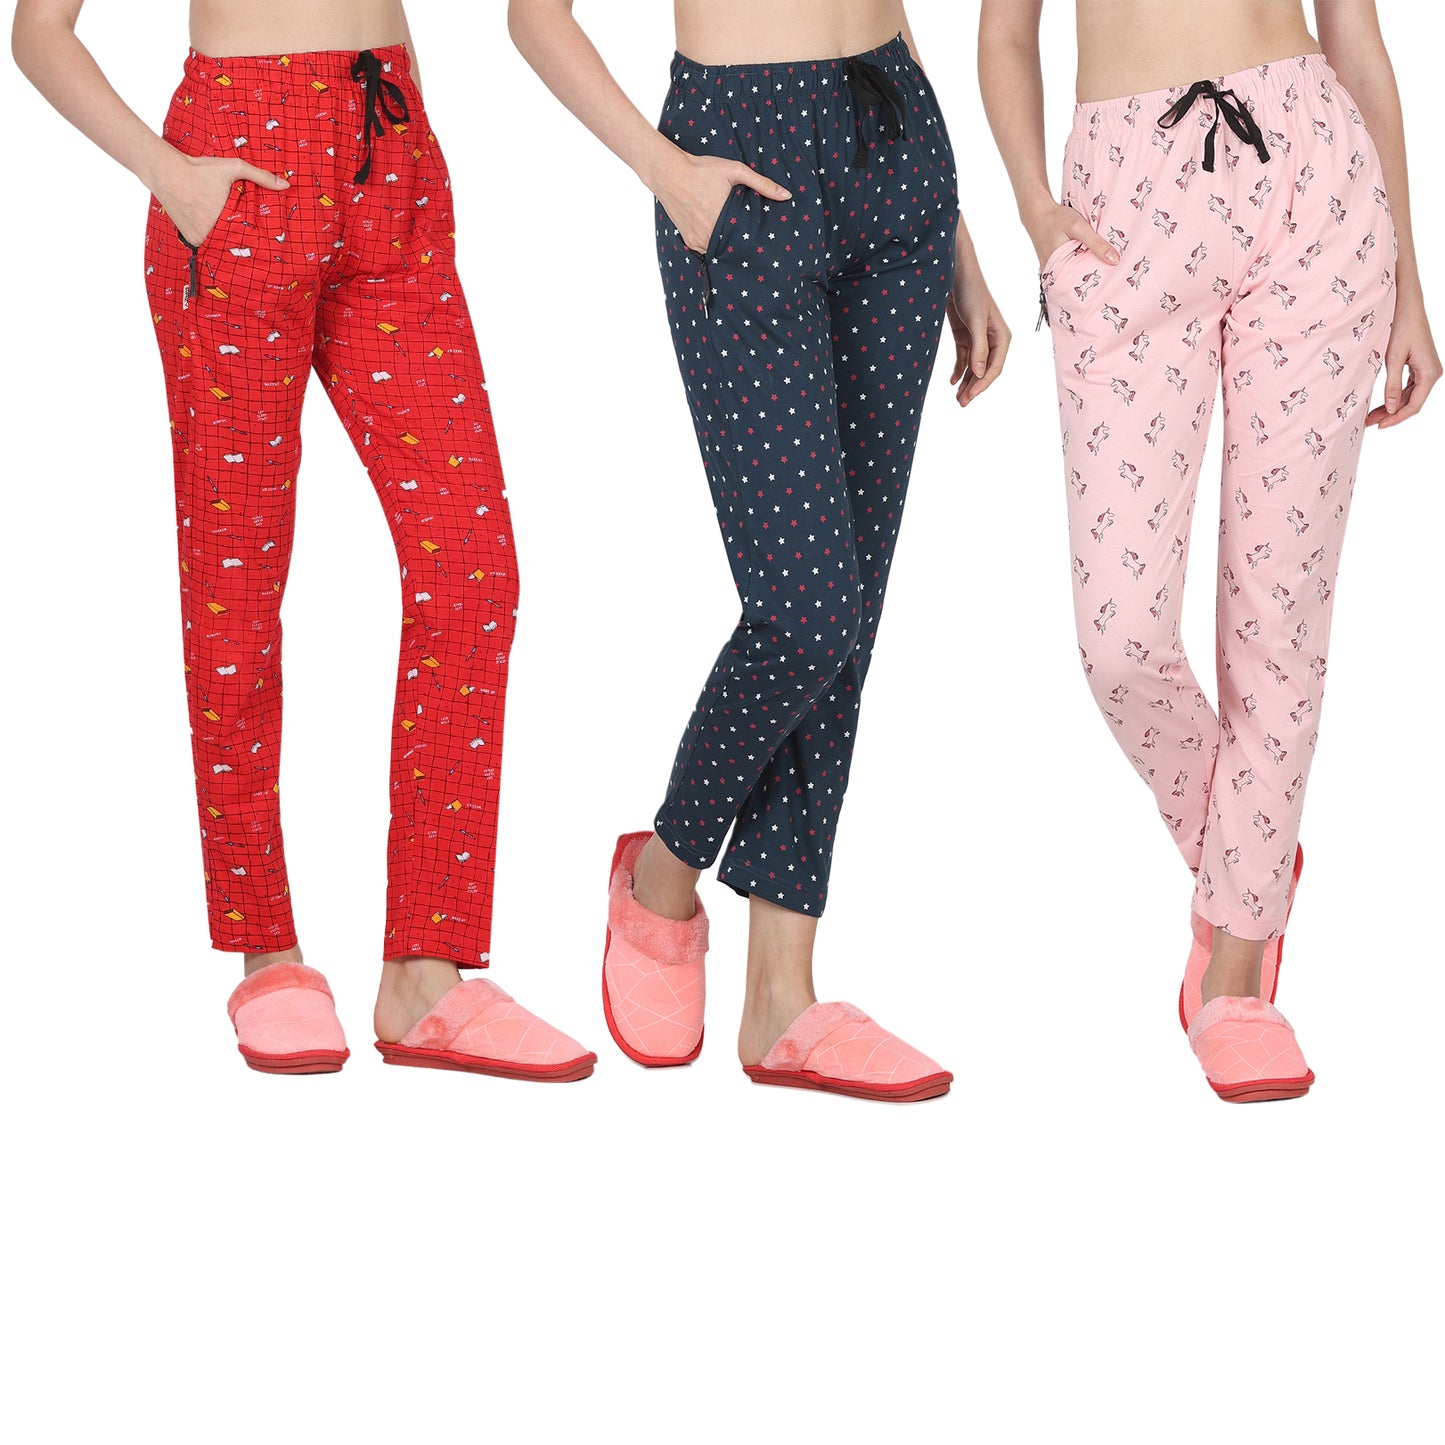 Eazy Women's Printed Lower - Pack of 3 - Bright Red, Pine Green & Light Pink